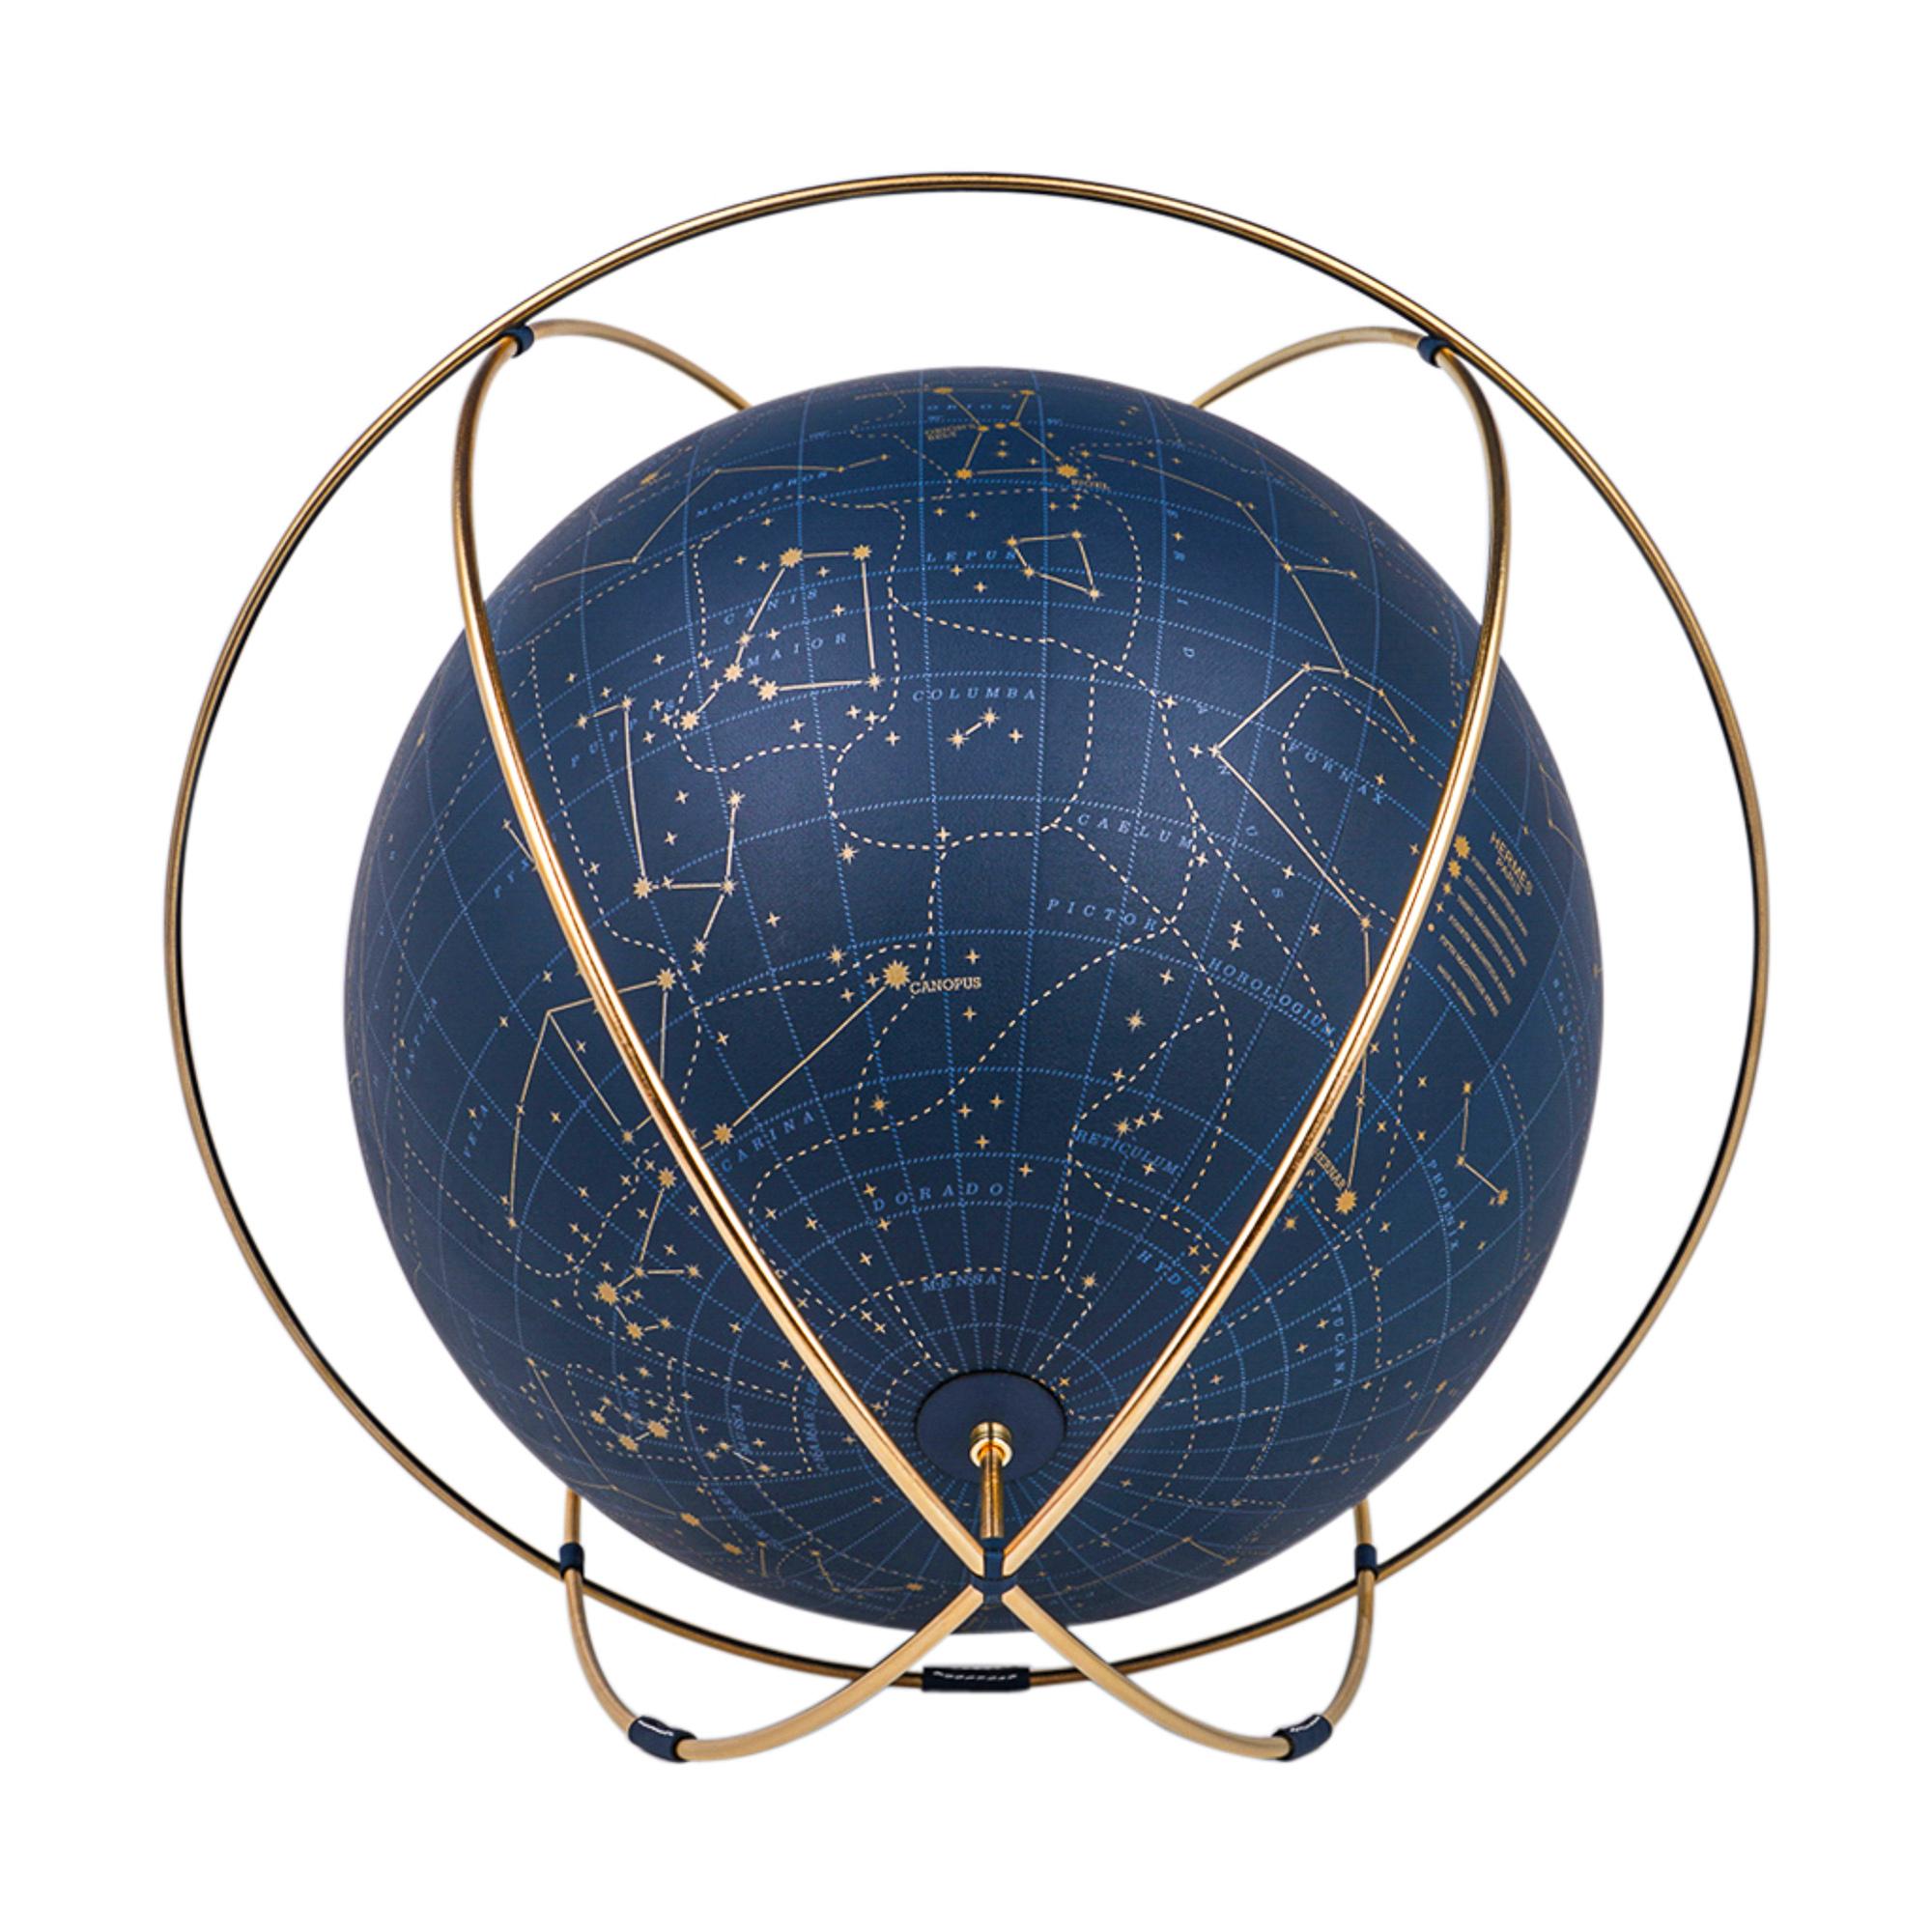 Mightychic offers an Hermes Apollo 24 Celestial Globe featured in Blue de Prusse.
Created from 12 sheathed pieces of printed leather the leather marquetry is exquisite.
The globe floats on the rings and creates a gorgeous free form to see the